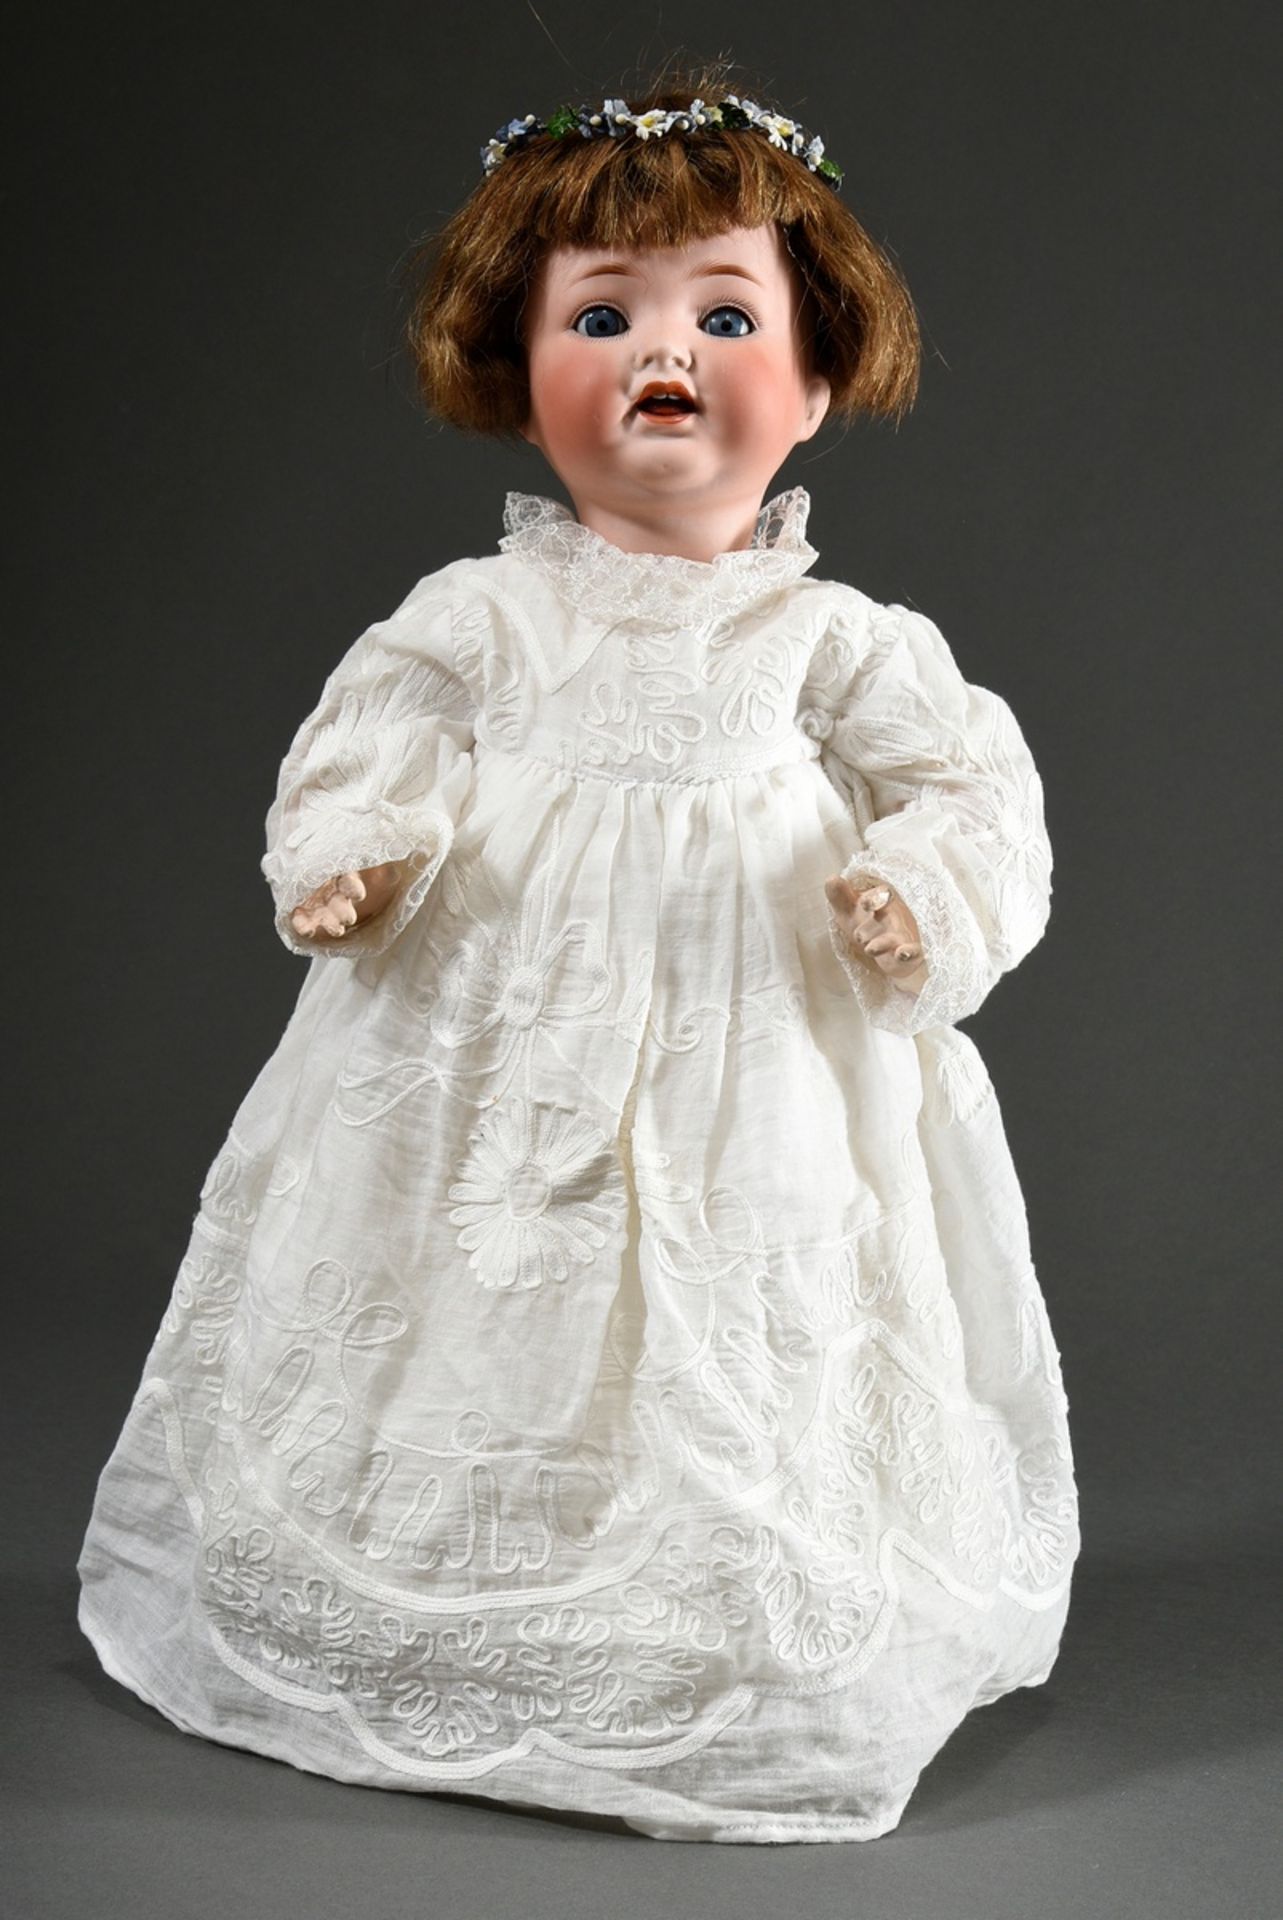 Ernst Heubach doll with bisque porcelain crank head, blue sleeping eyes, painted eyelashes, open mo